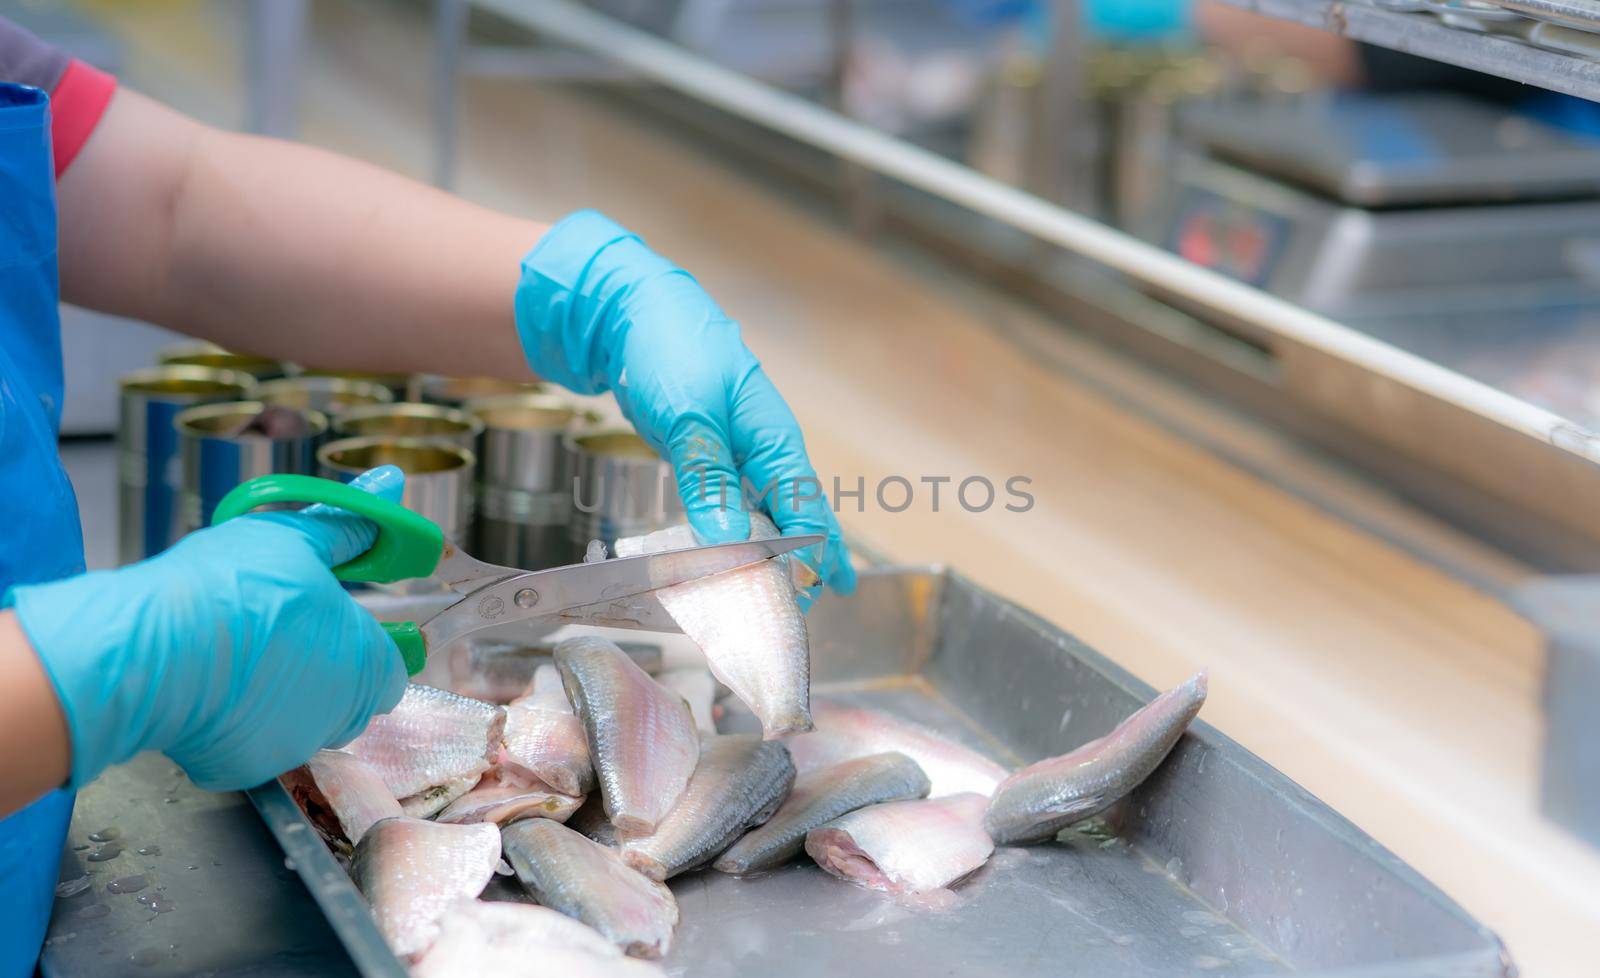 Worker working in a canned food factory. Food industry. Canned fish factory. Worker's hand cutting sardine to fill in cans. Worker in food processing production line. Food manufacturing industry. by Fahroni